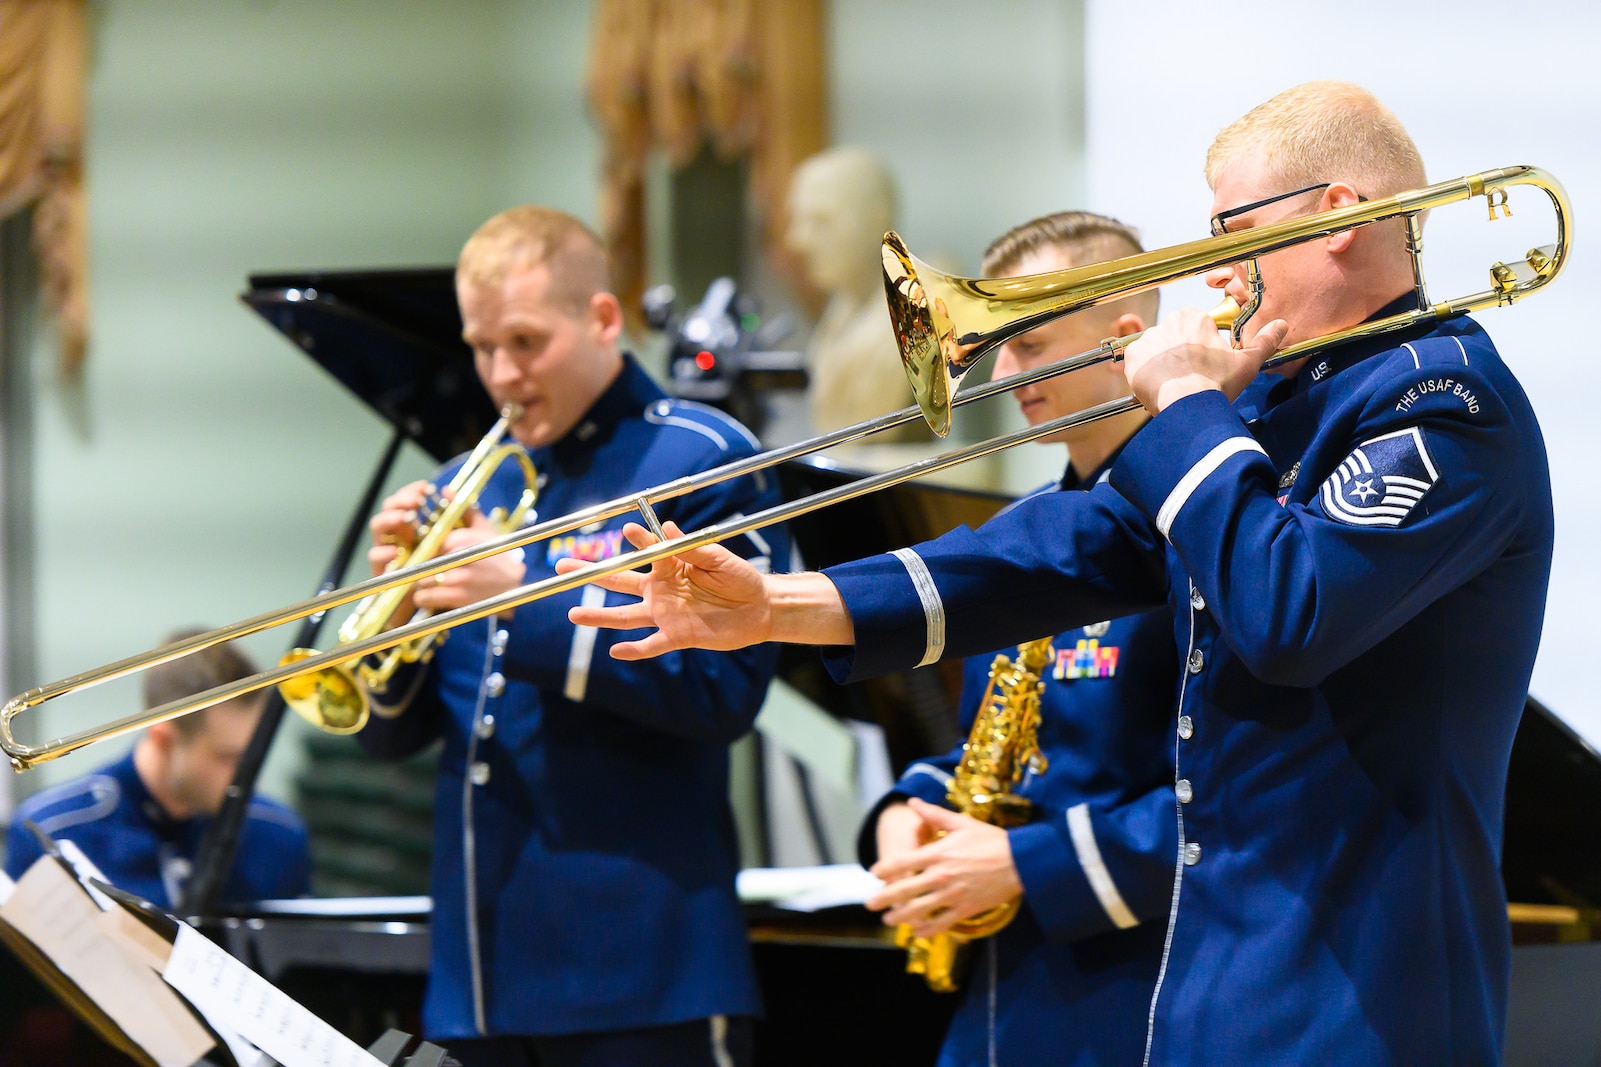 Four Air Force musicians--a trombonist, trumpeter, saxophonist, and pianist--are performing. Each are wearing dark blue Air Force uniforms.